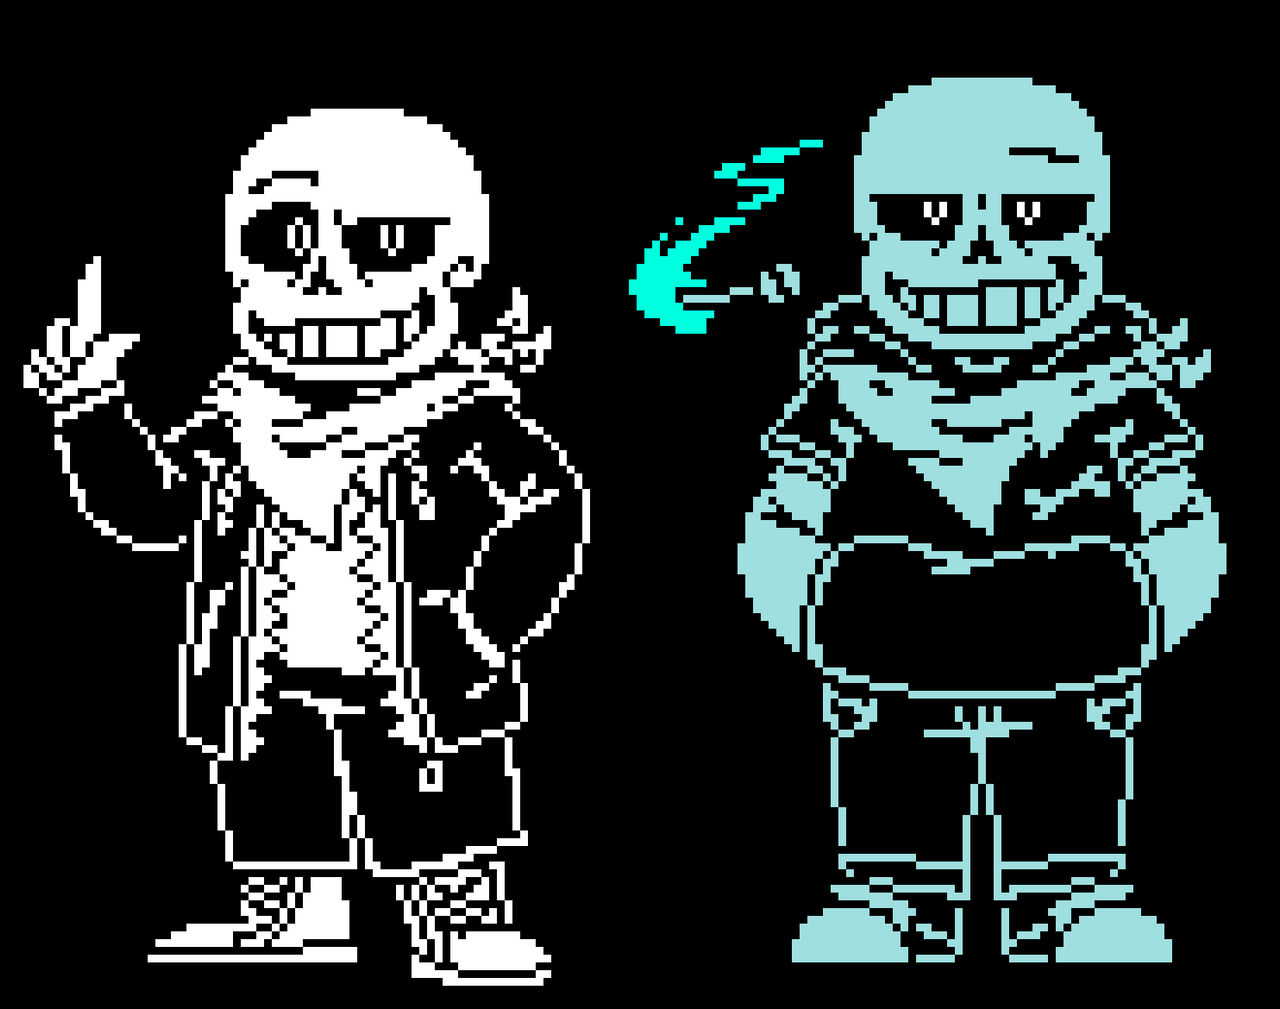 The Many Versions Of Swap Sans by SilvespioGirlOvia07 on DeviantArt